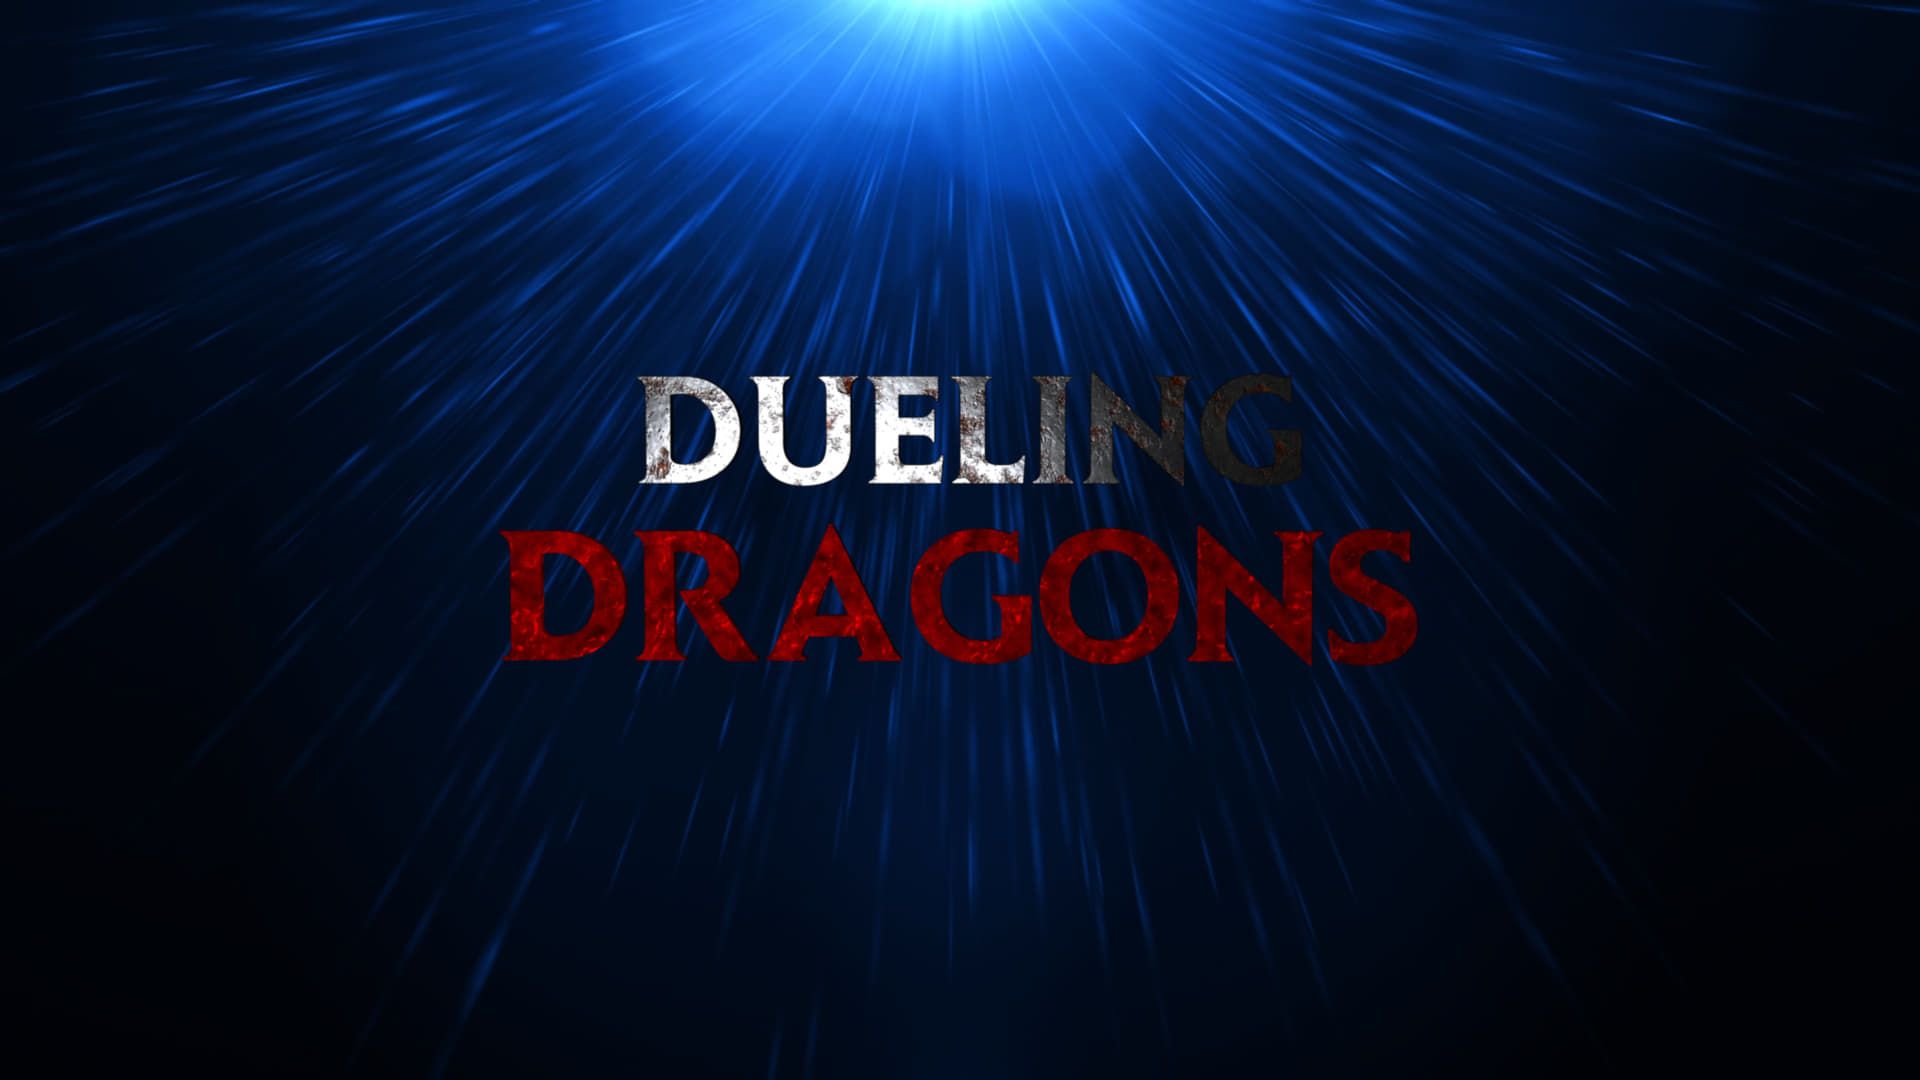 Dueling Dragons background